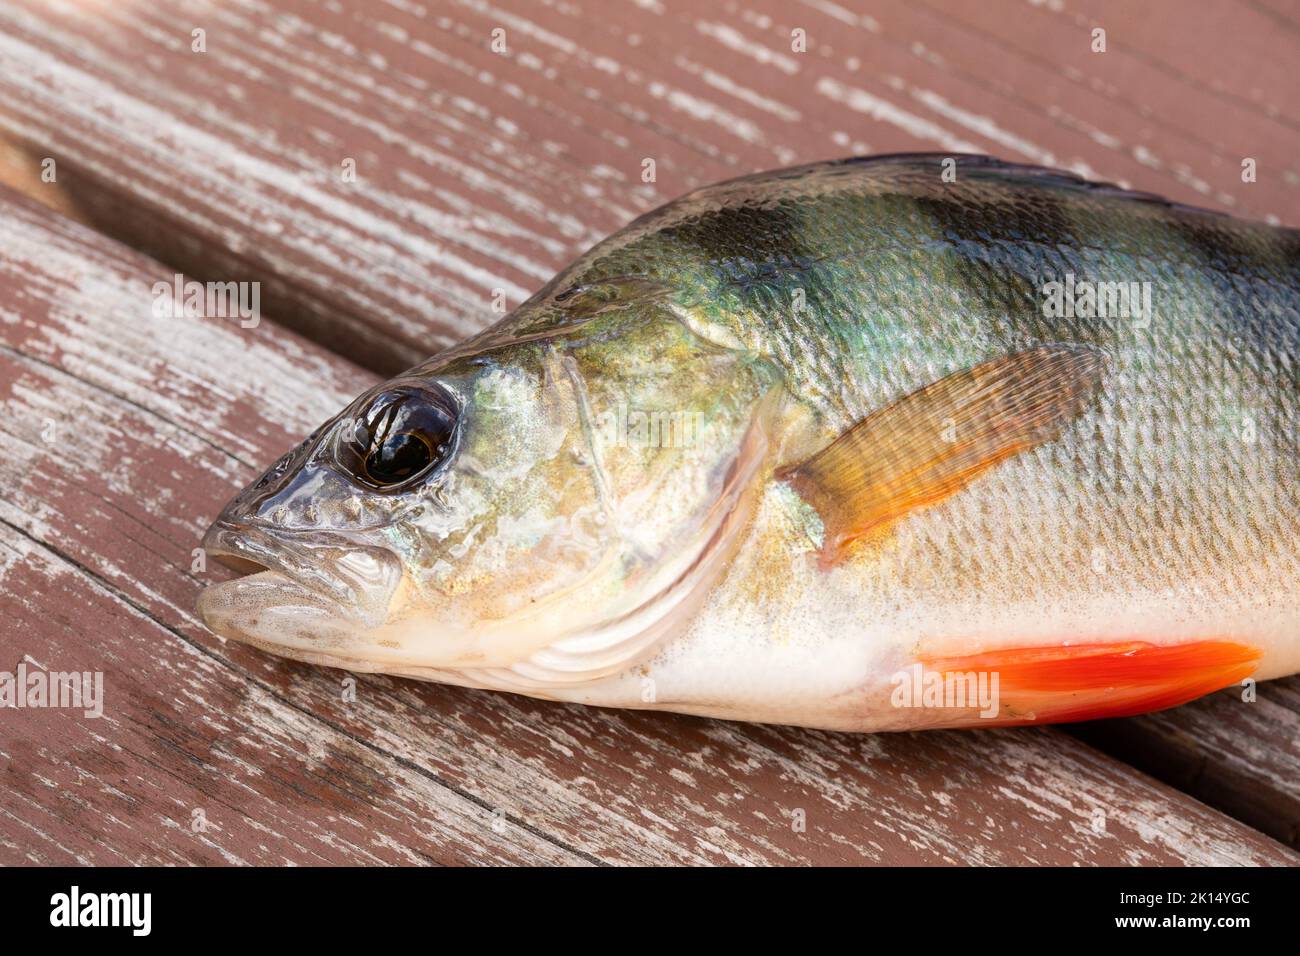 Close up freshly caught river perch bass head on a wooden background. Freshwater fish, red orange fins, scales in silver green and dark colors, a typi Stock Photo